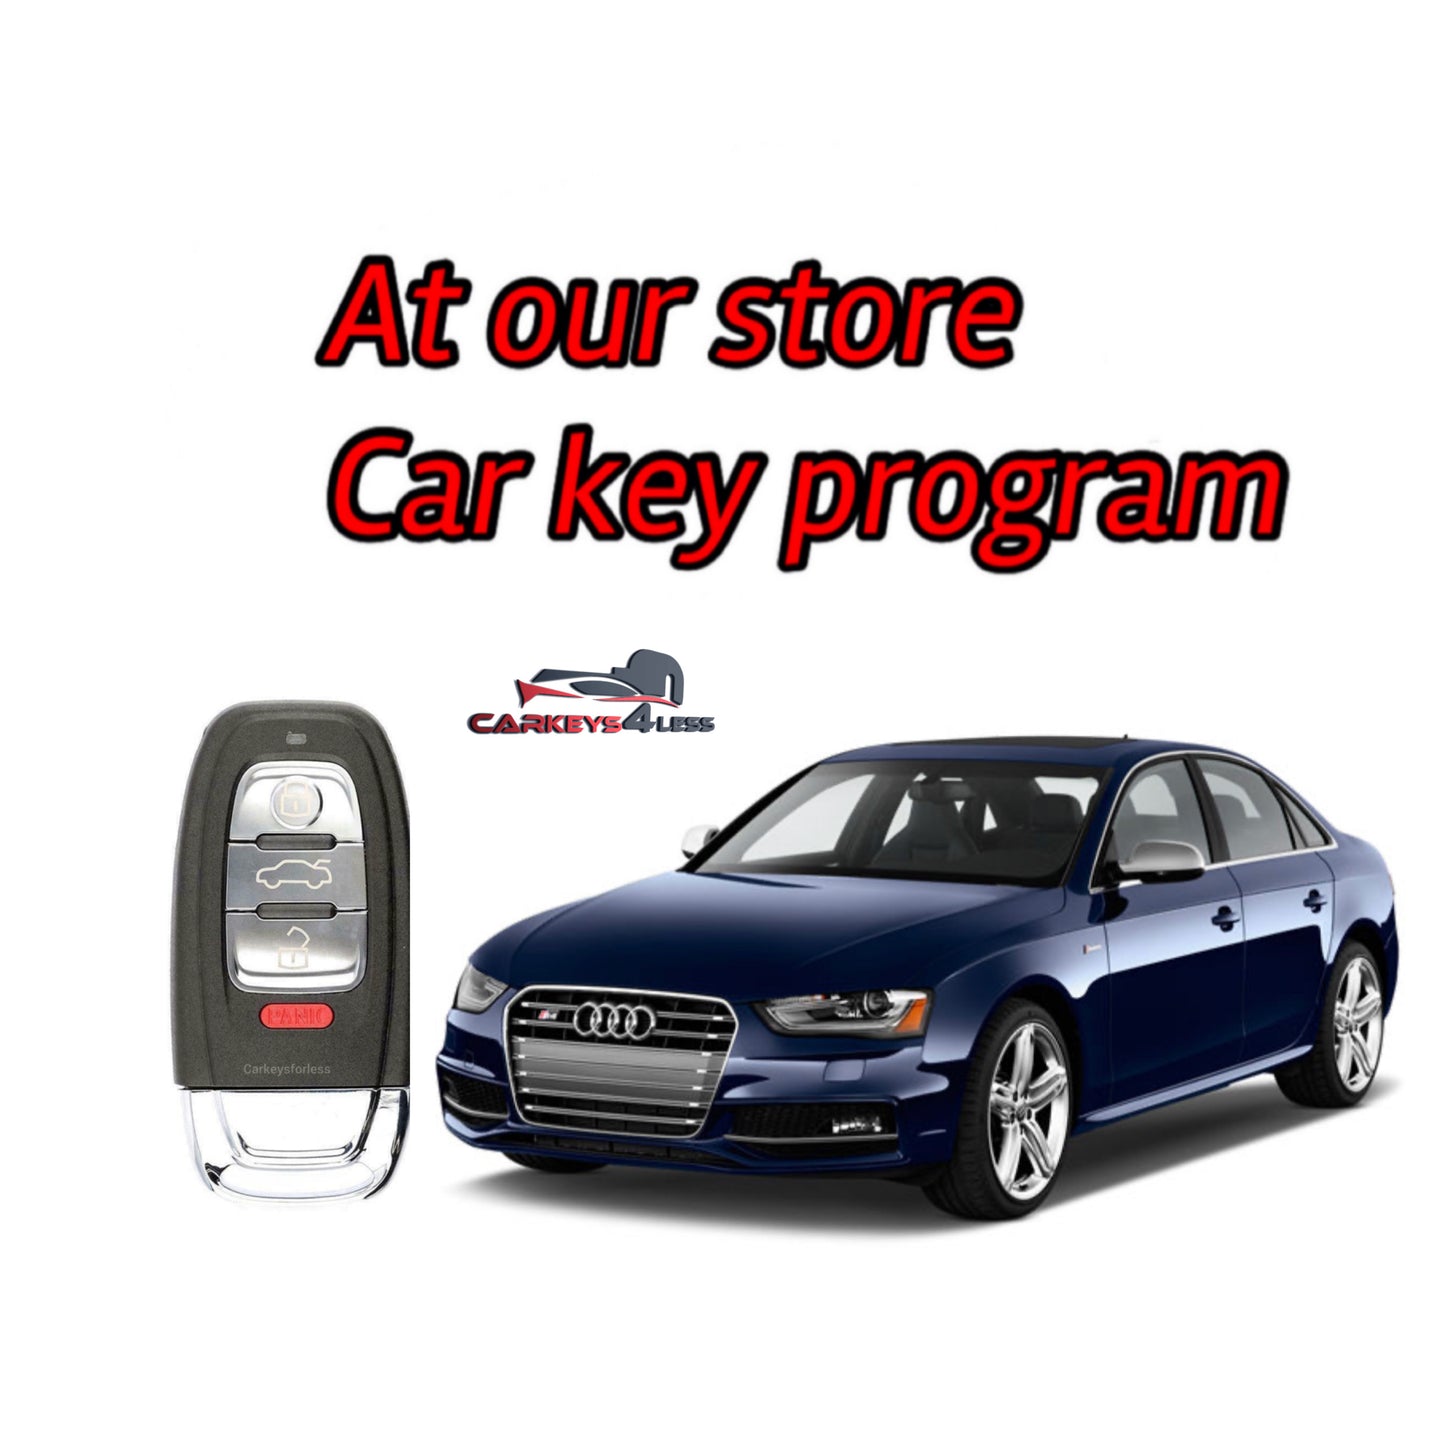 At our store audi car key replacement